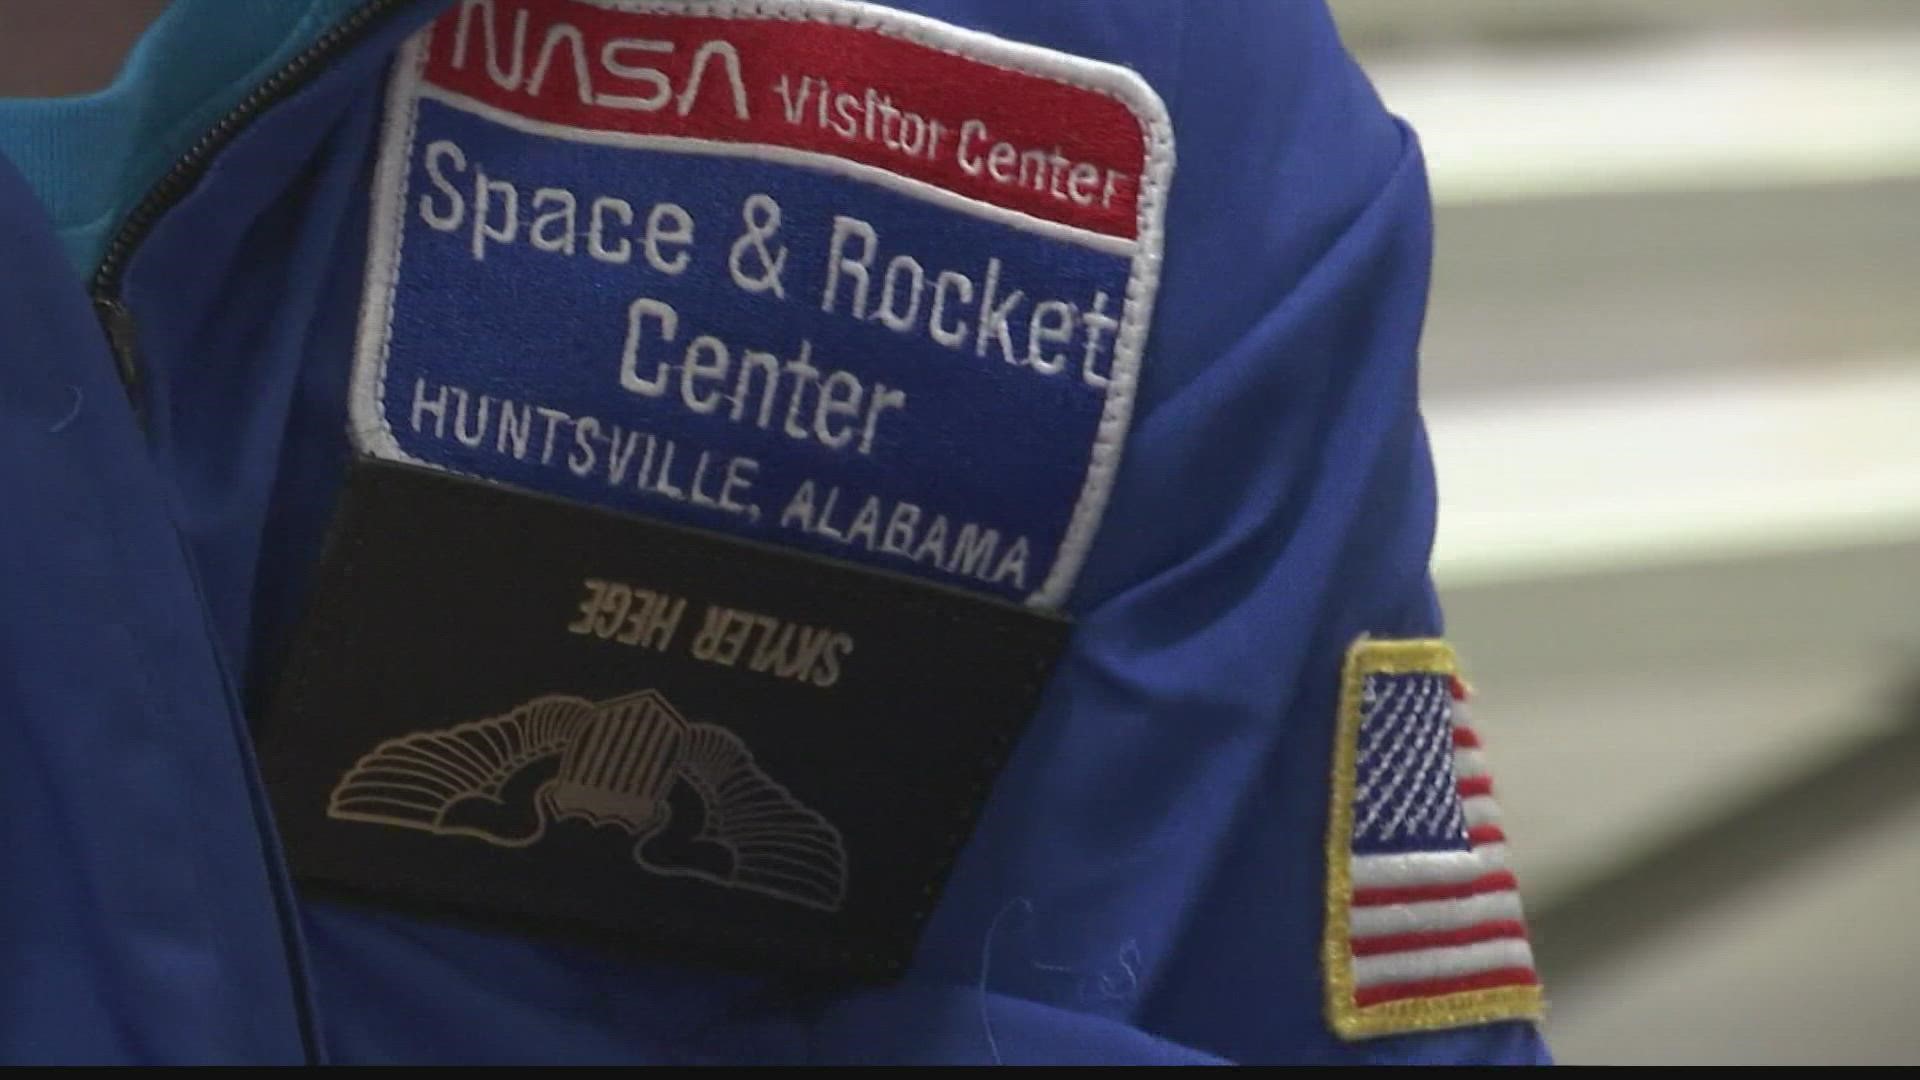 Collectively, nearly $1 million was secured for organizations in Huntsville.